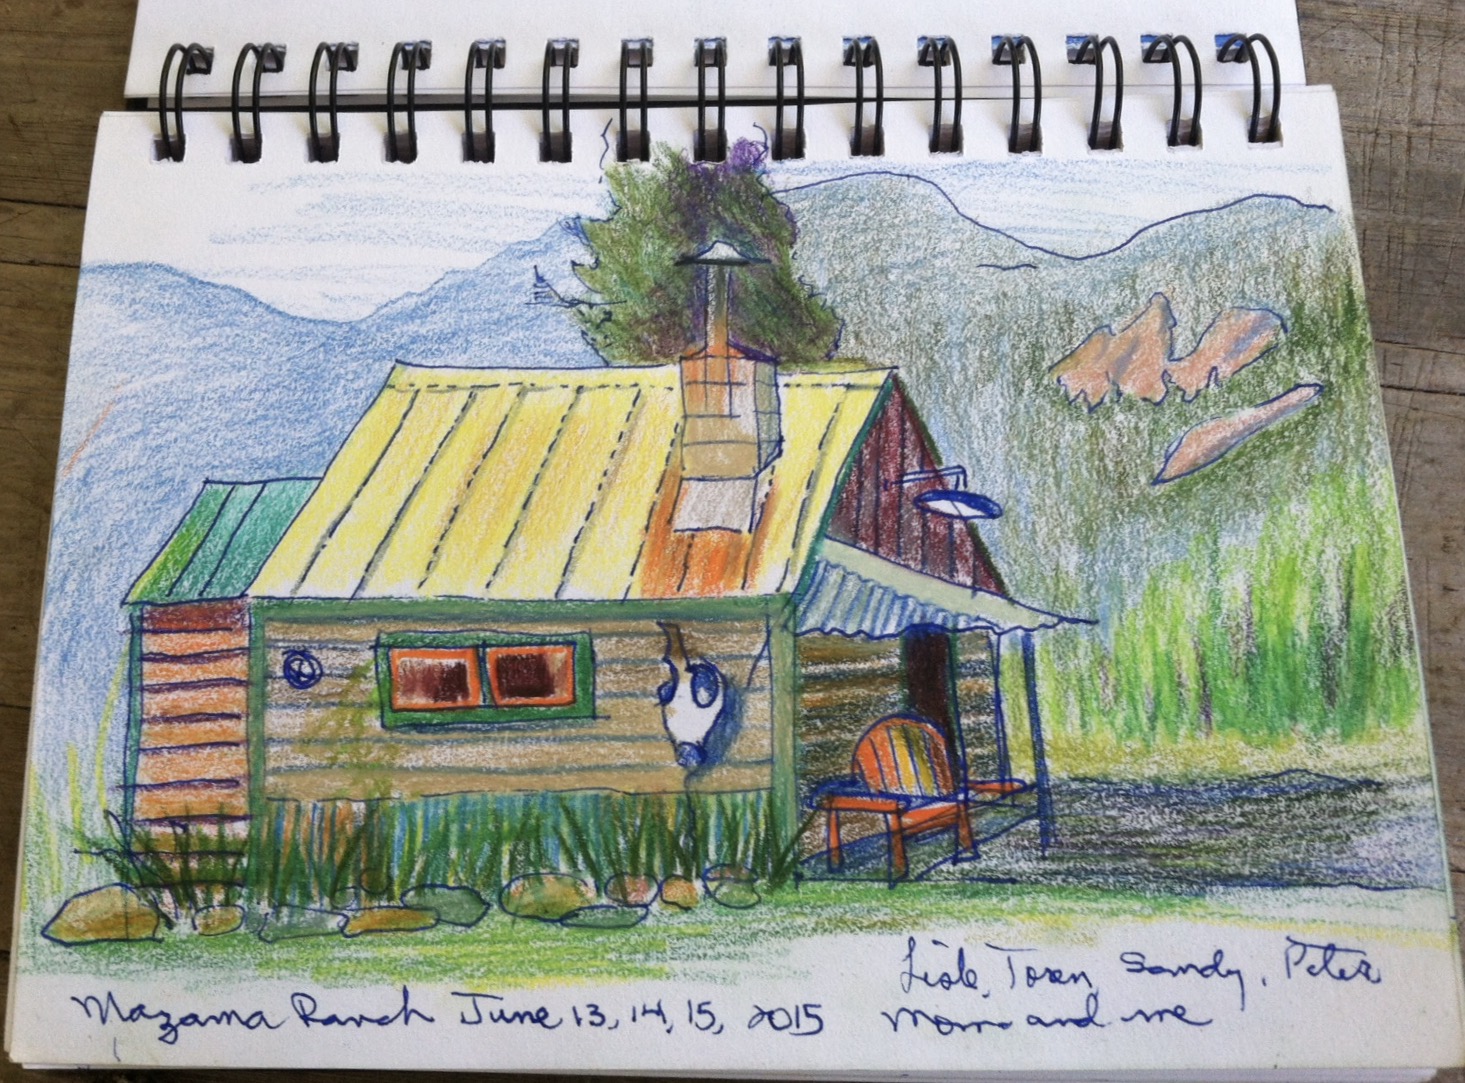 Oldest sister Cheryl Renee Long, artist, sketched our location at the Mazama Ranch House.